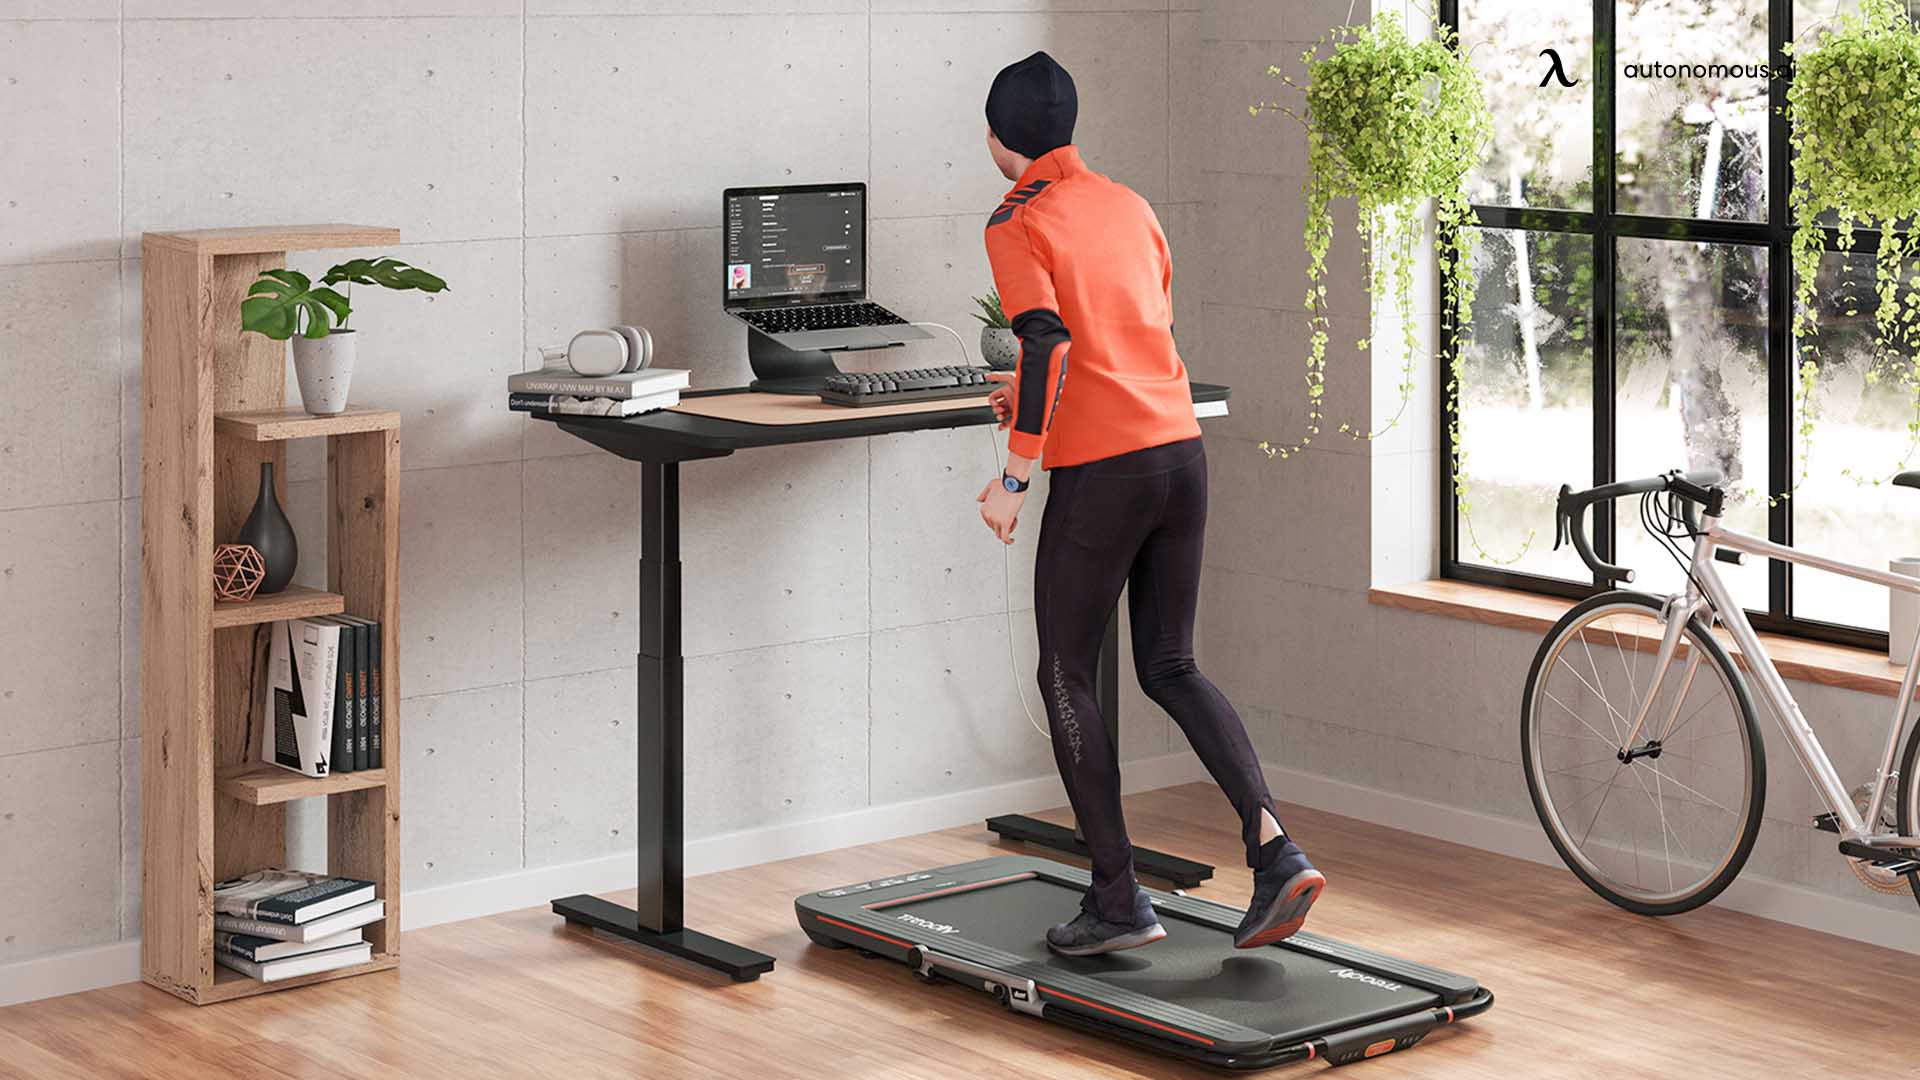 Walking on a Treadmill office abs workout